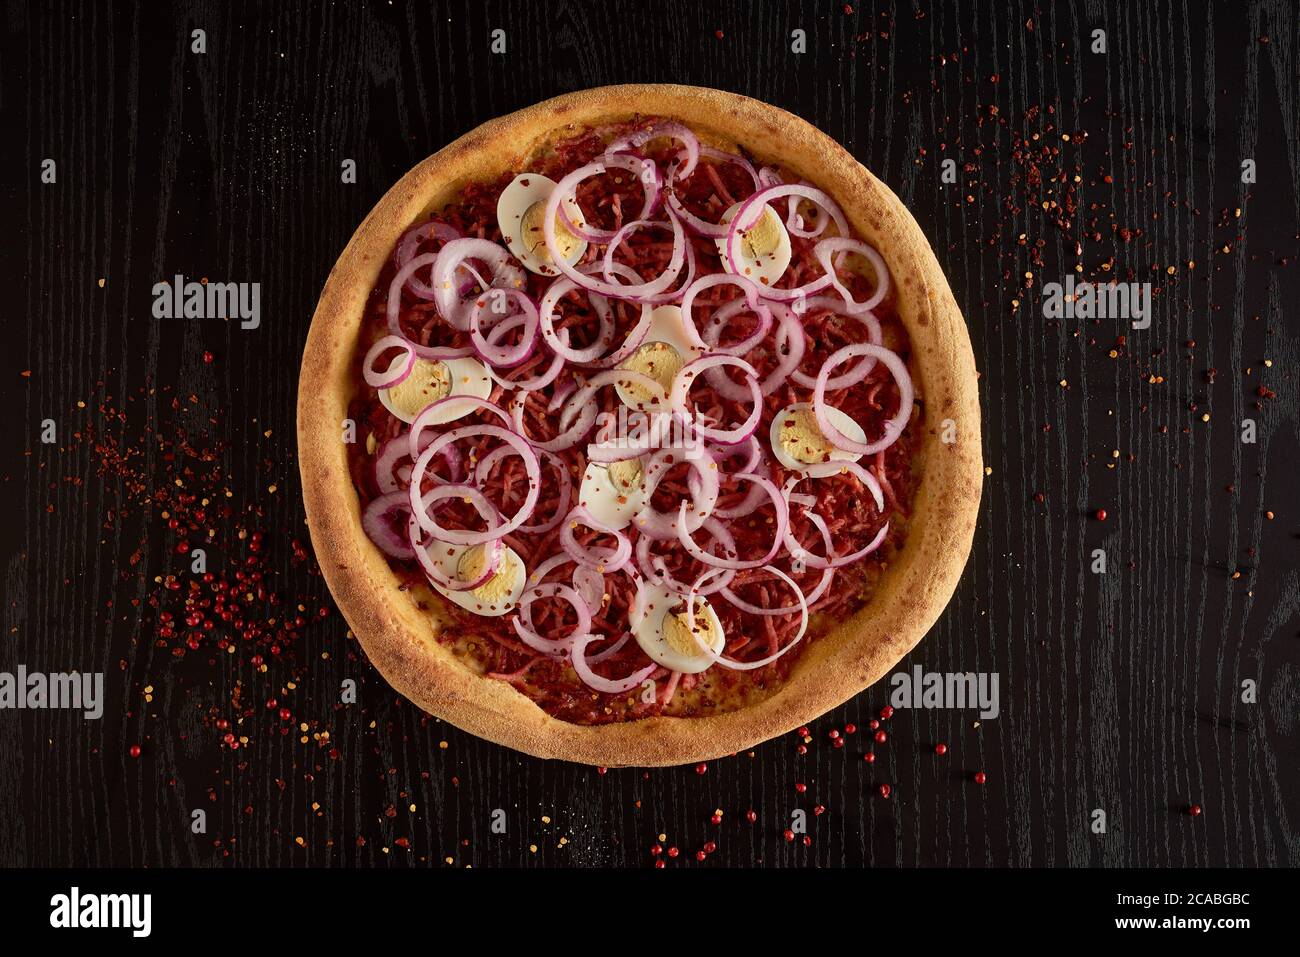 onion, eggs and pepperoni pizza on black background isolated Stock Photo